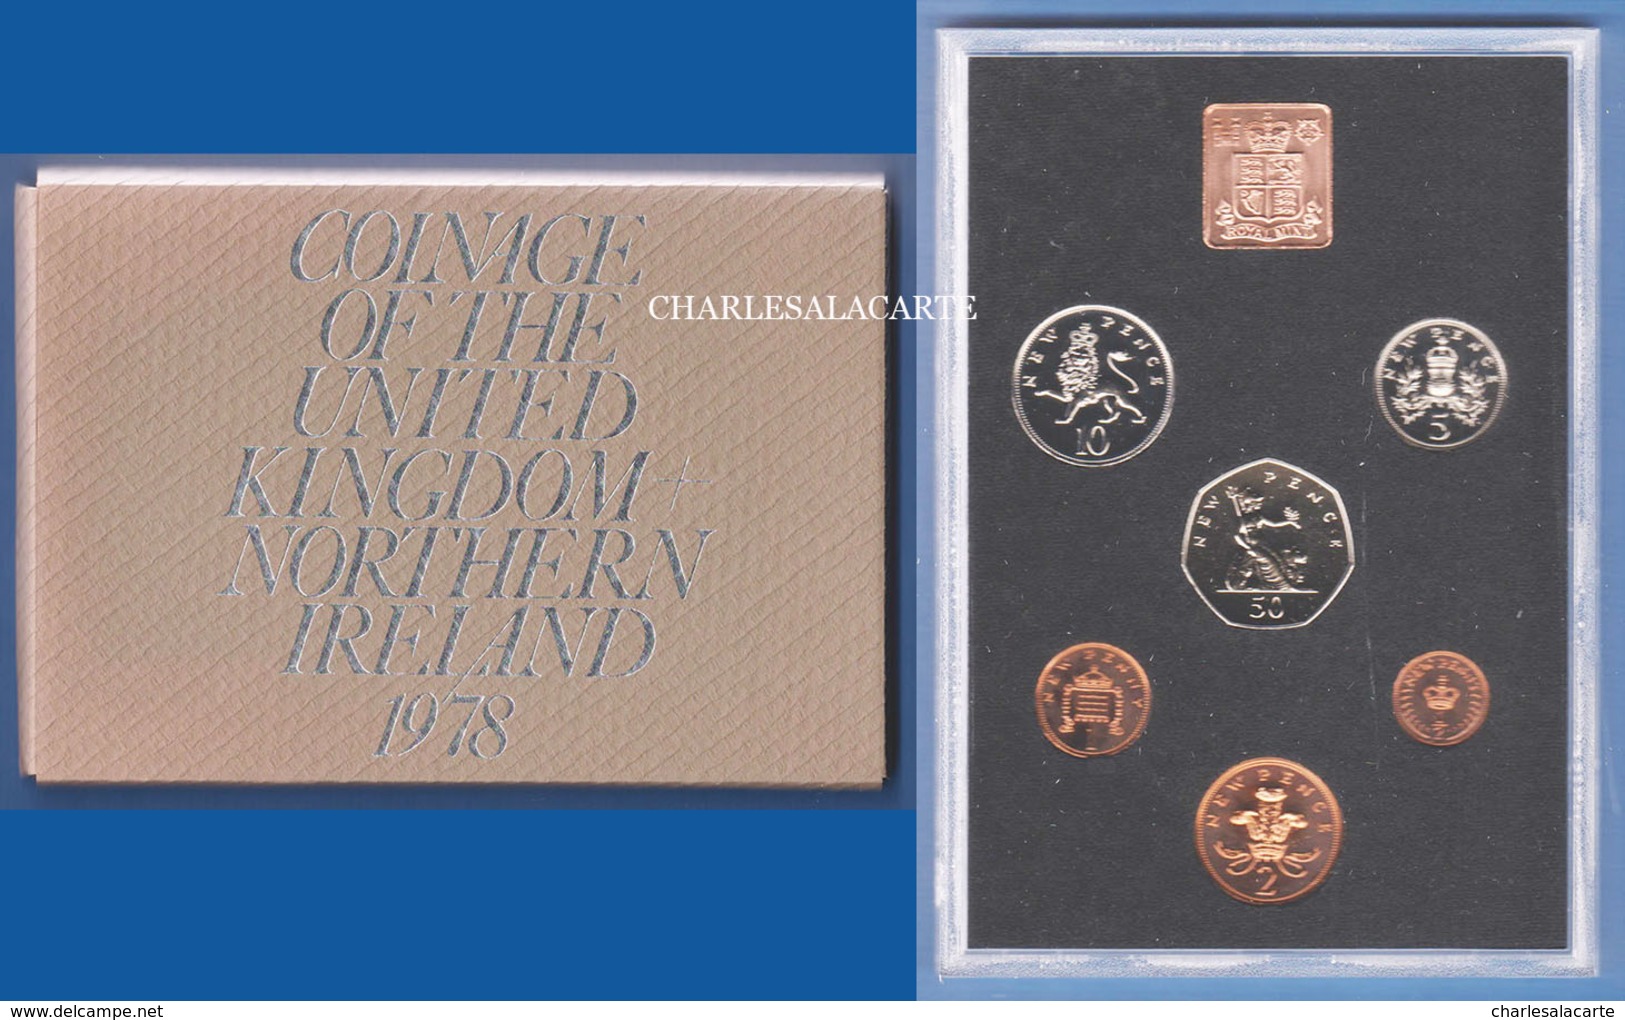 GREAT BRITAIN 1978  COINAGE OF THE U.K. & N.I. ORIGINAL FOLDER  VERY FINE CONDITION - Nieuwe Sets & Proefsets